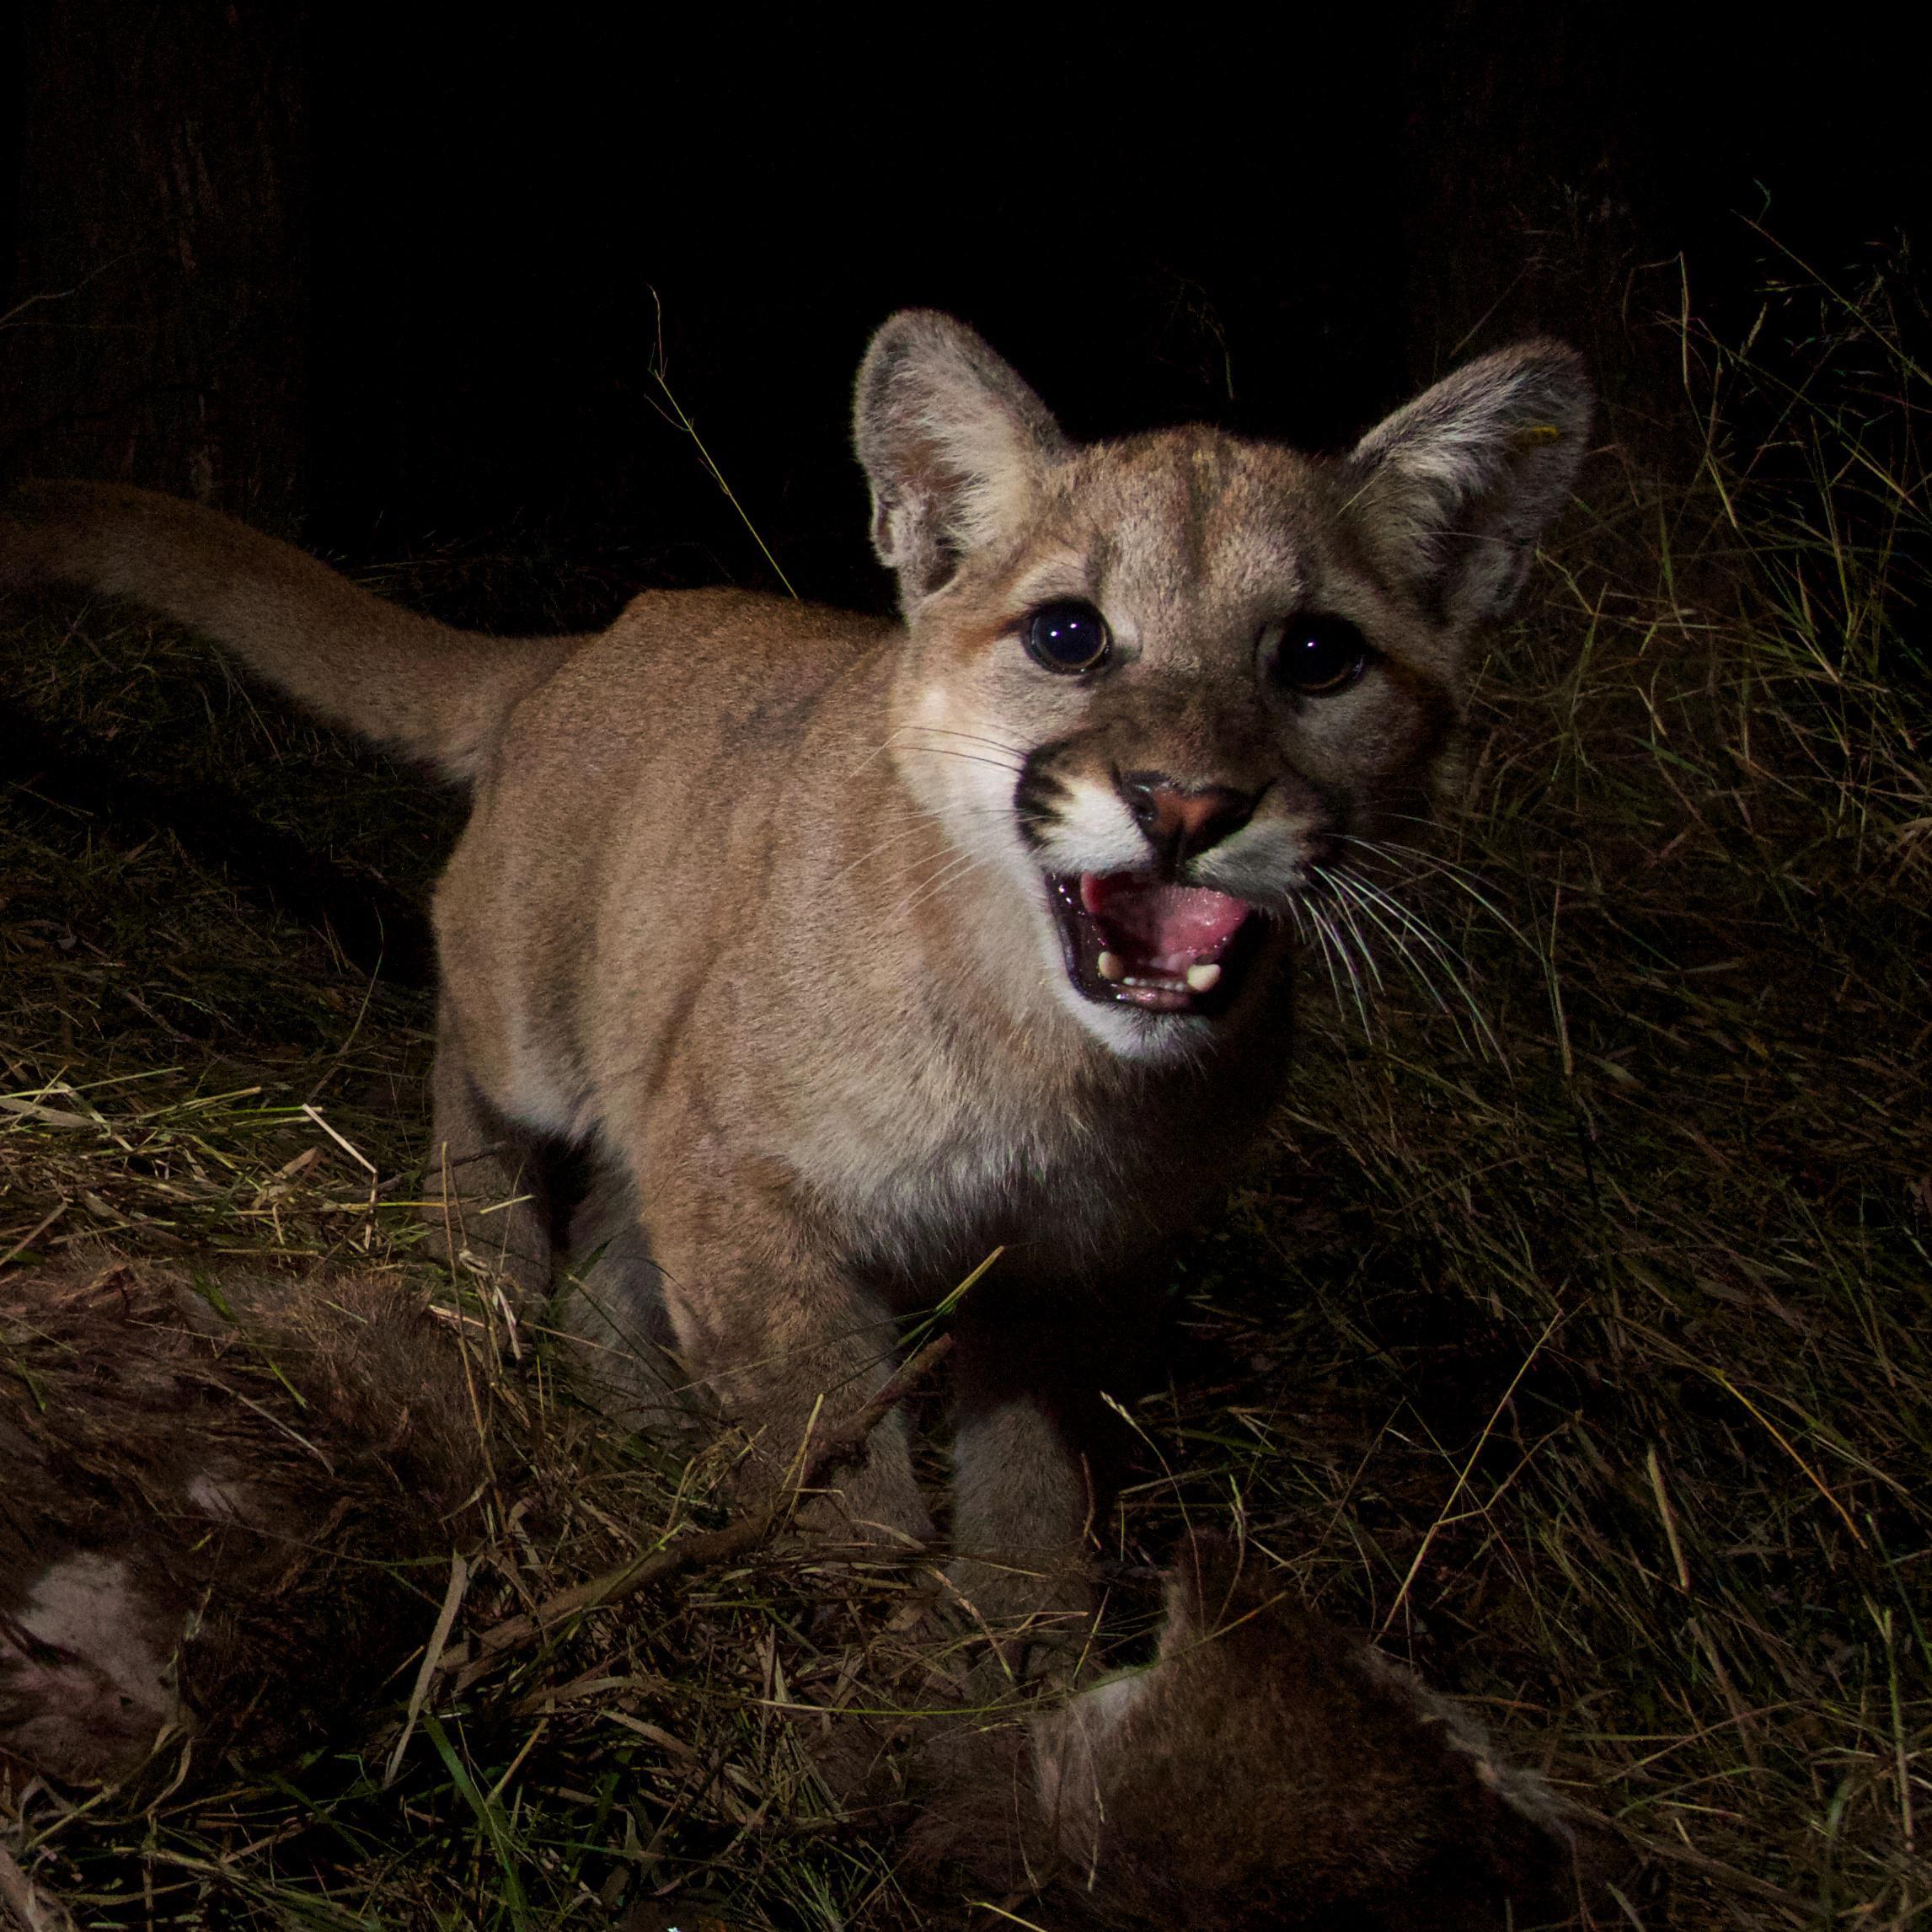 Are There More Cougars In Our Space Or More Of Us In Theirs? - OPB